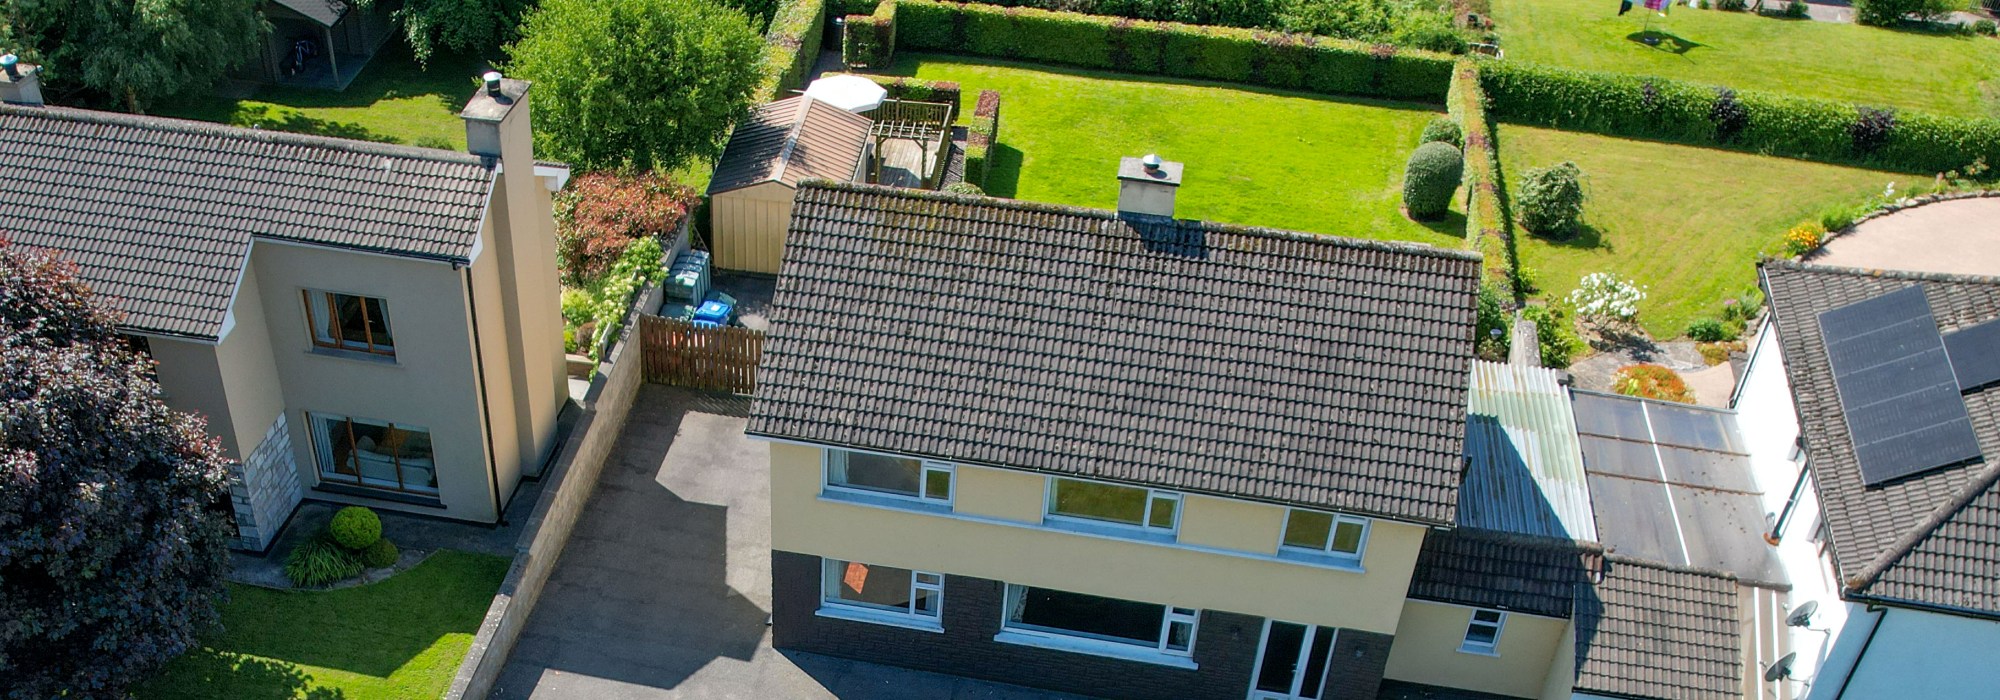 4/5 Bedroom Family Home | Greenhill, Fermoy P61 A993